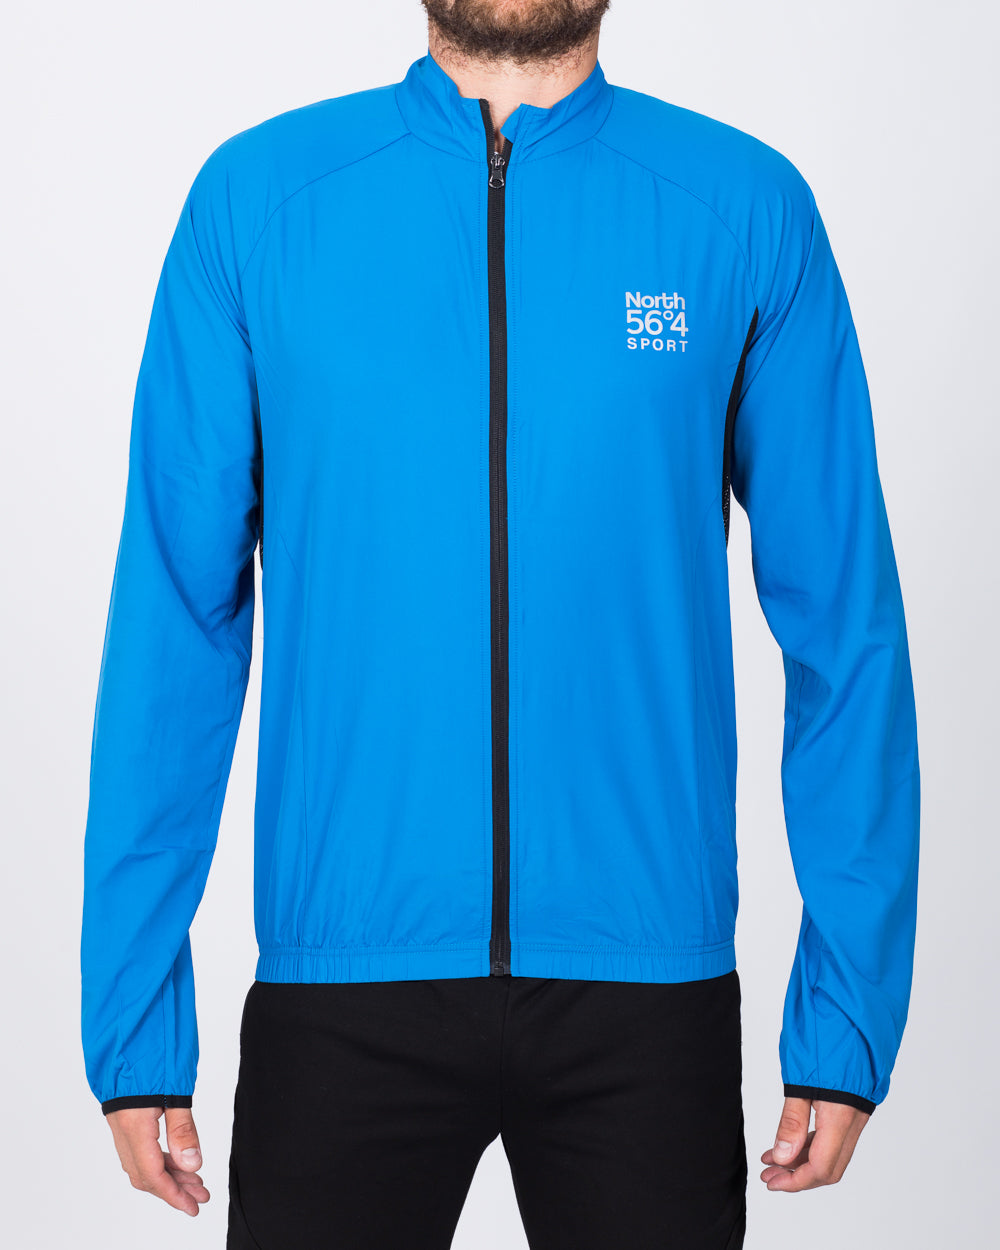 North 56 Lightweight Cycling Jacket (blue)